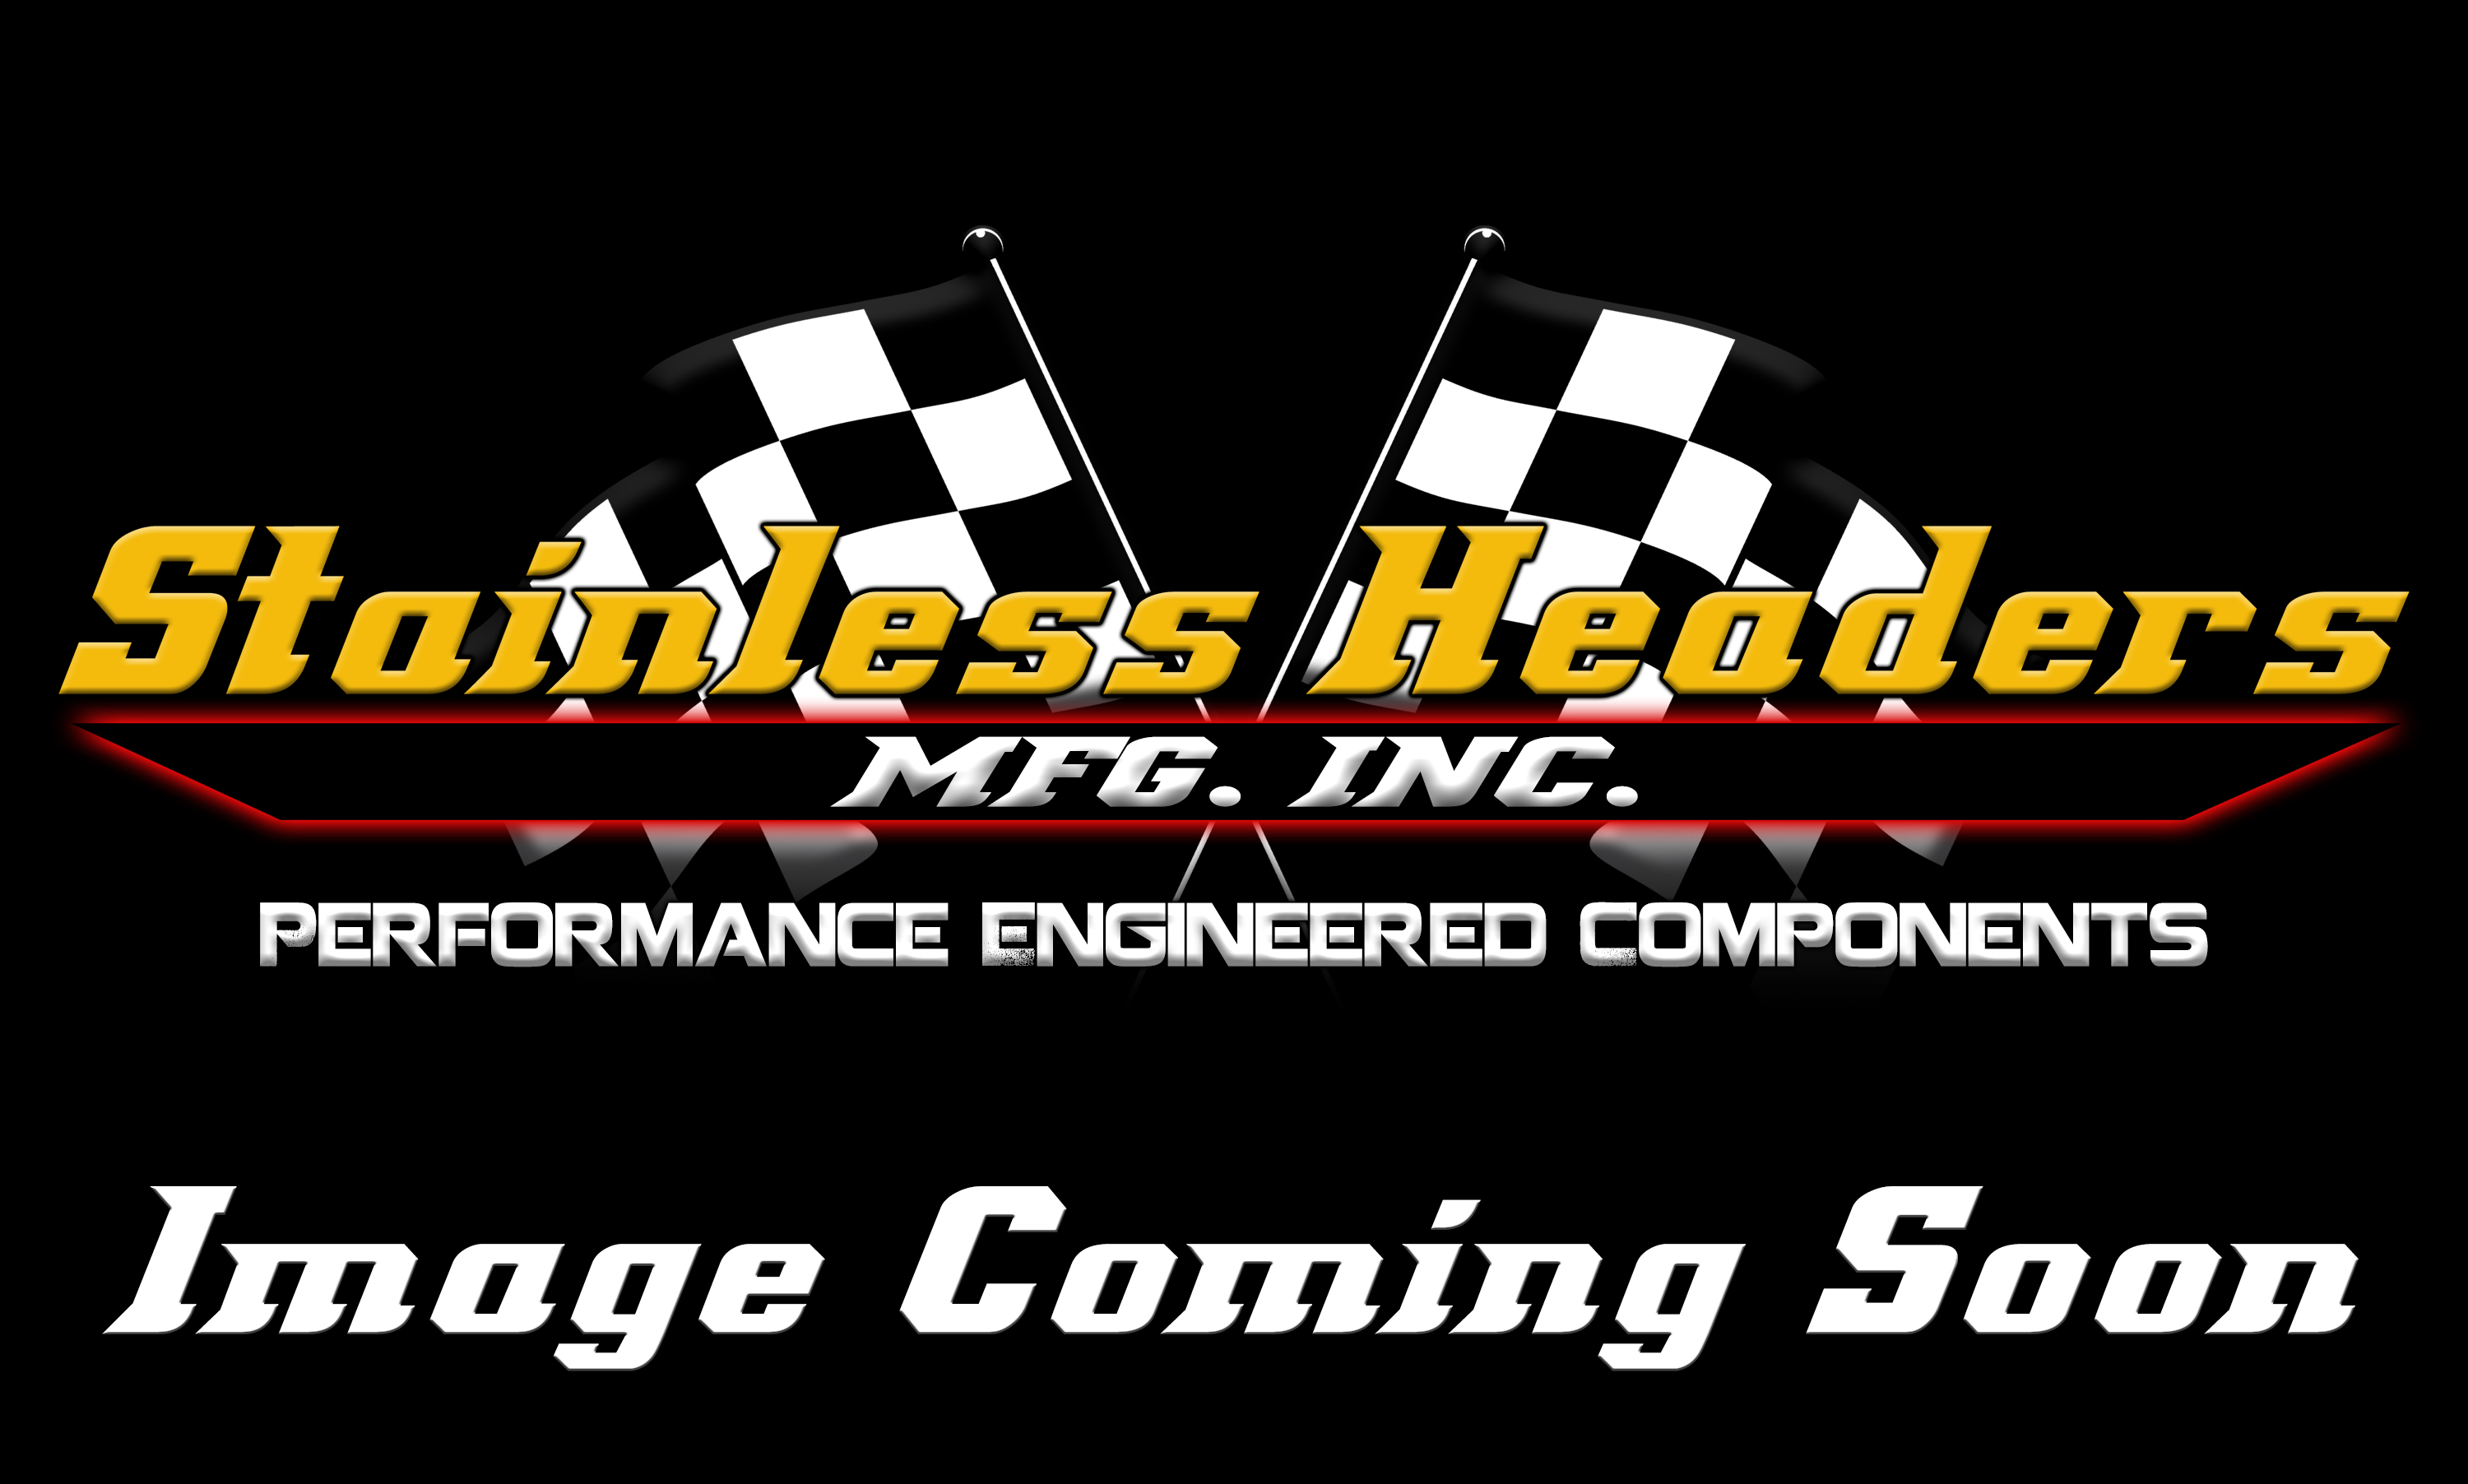 CompTurbo Technologies - CTR4276R-7685 Mid Frame 360 Journal Bearing Turbocharger (1320 HP)